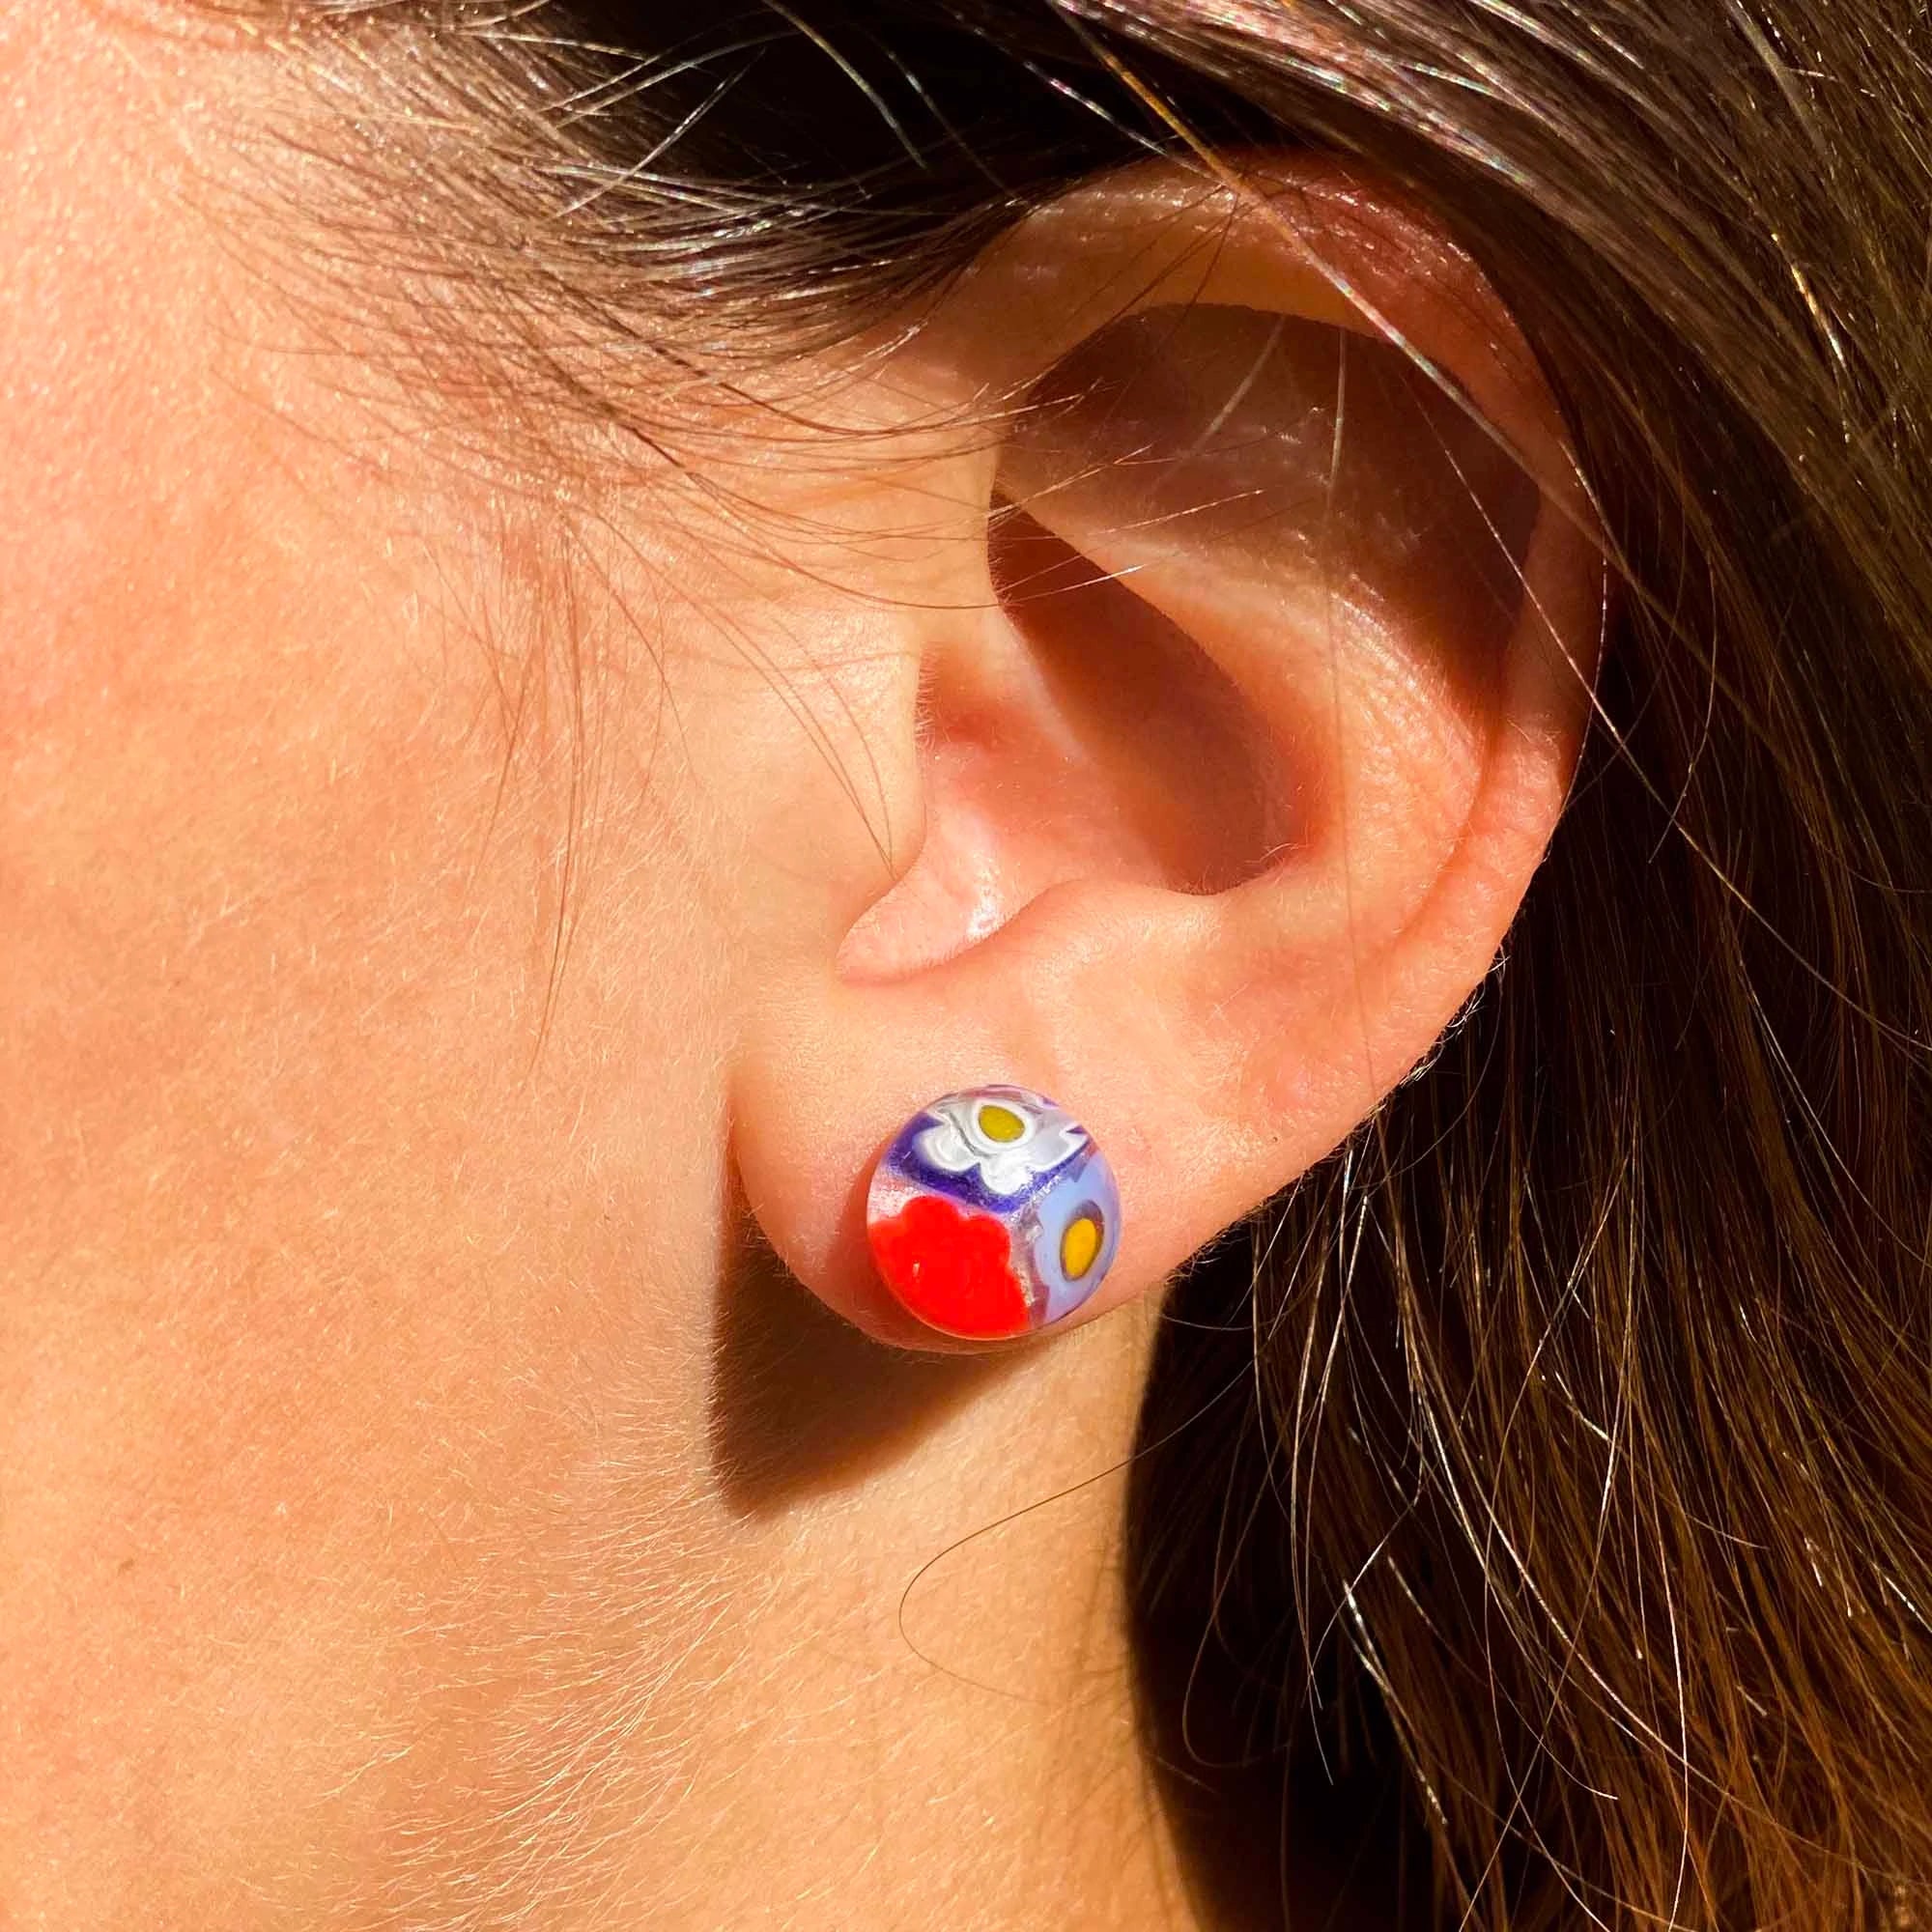 Angelco Accessories Chilean glass daisy stud - red white & blue